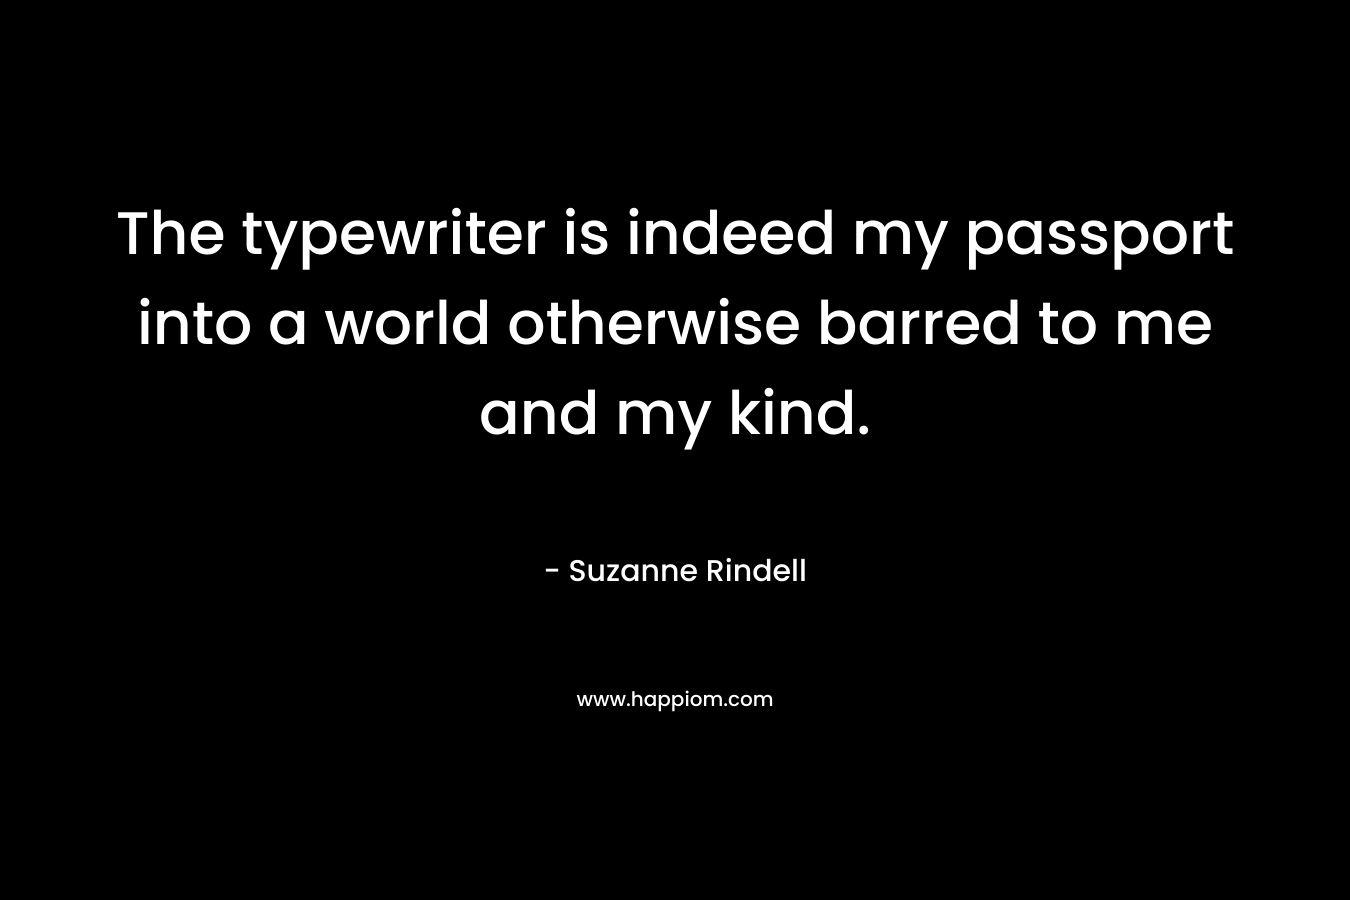 The typewriter is indeed my passport into a world otherwise barred to me and my kind. – Suzanne Rindell